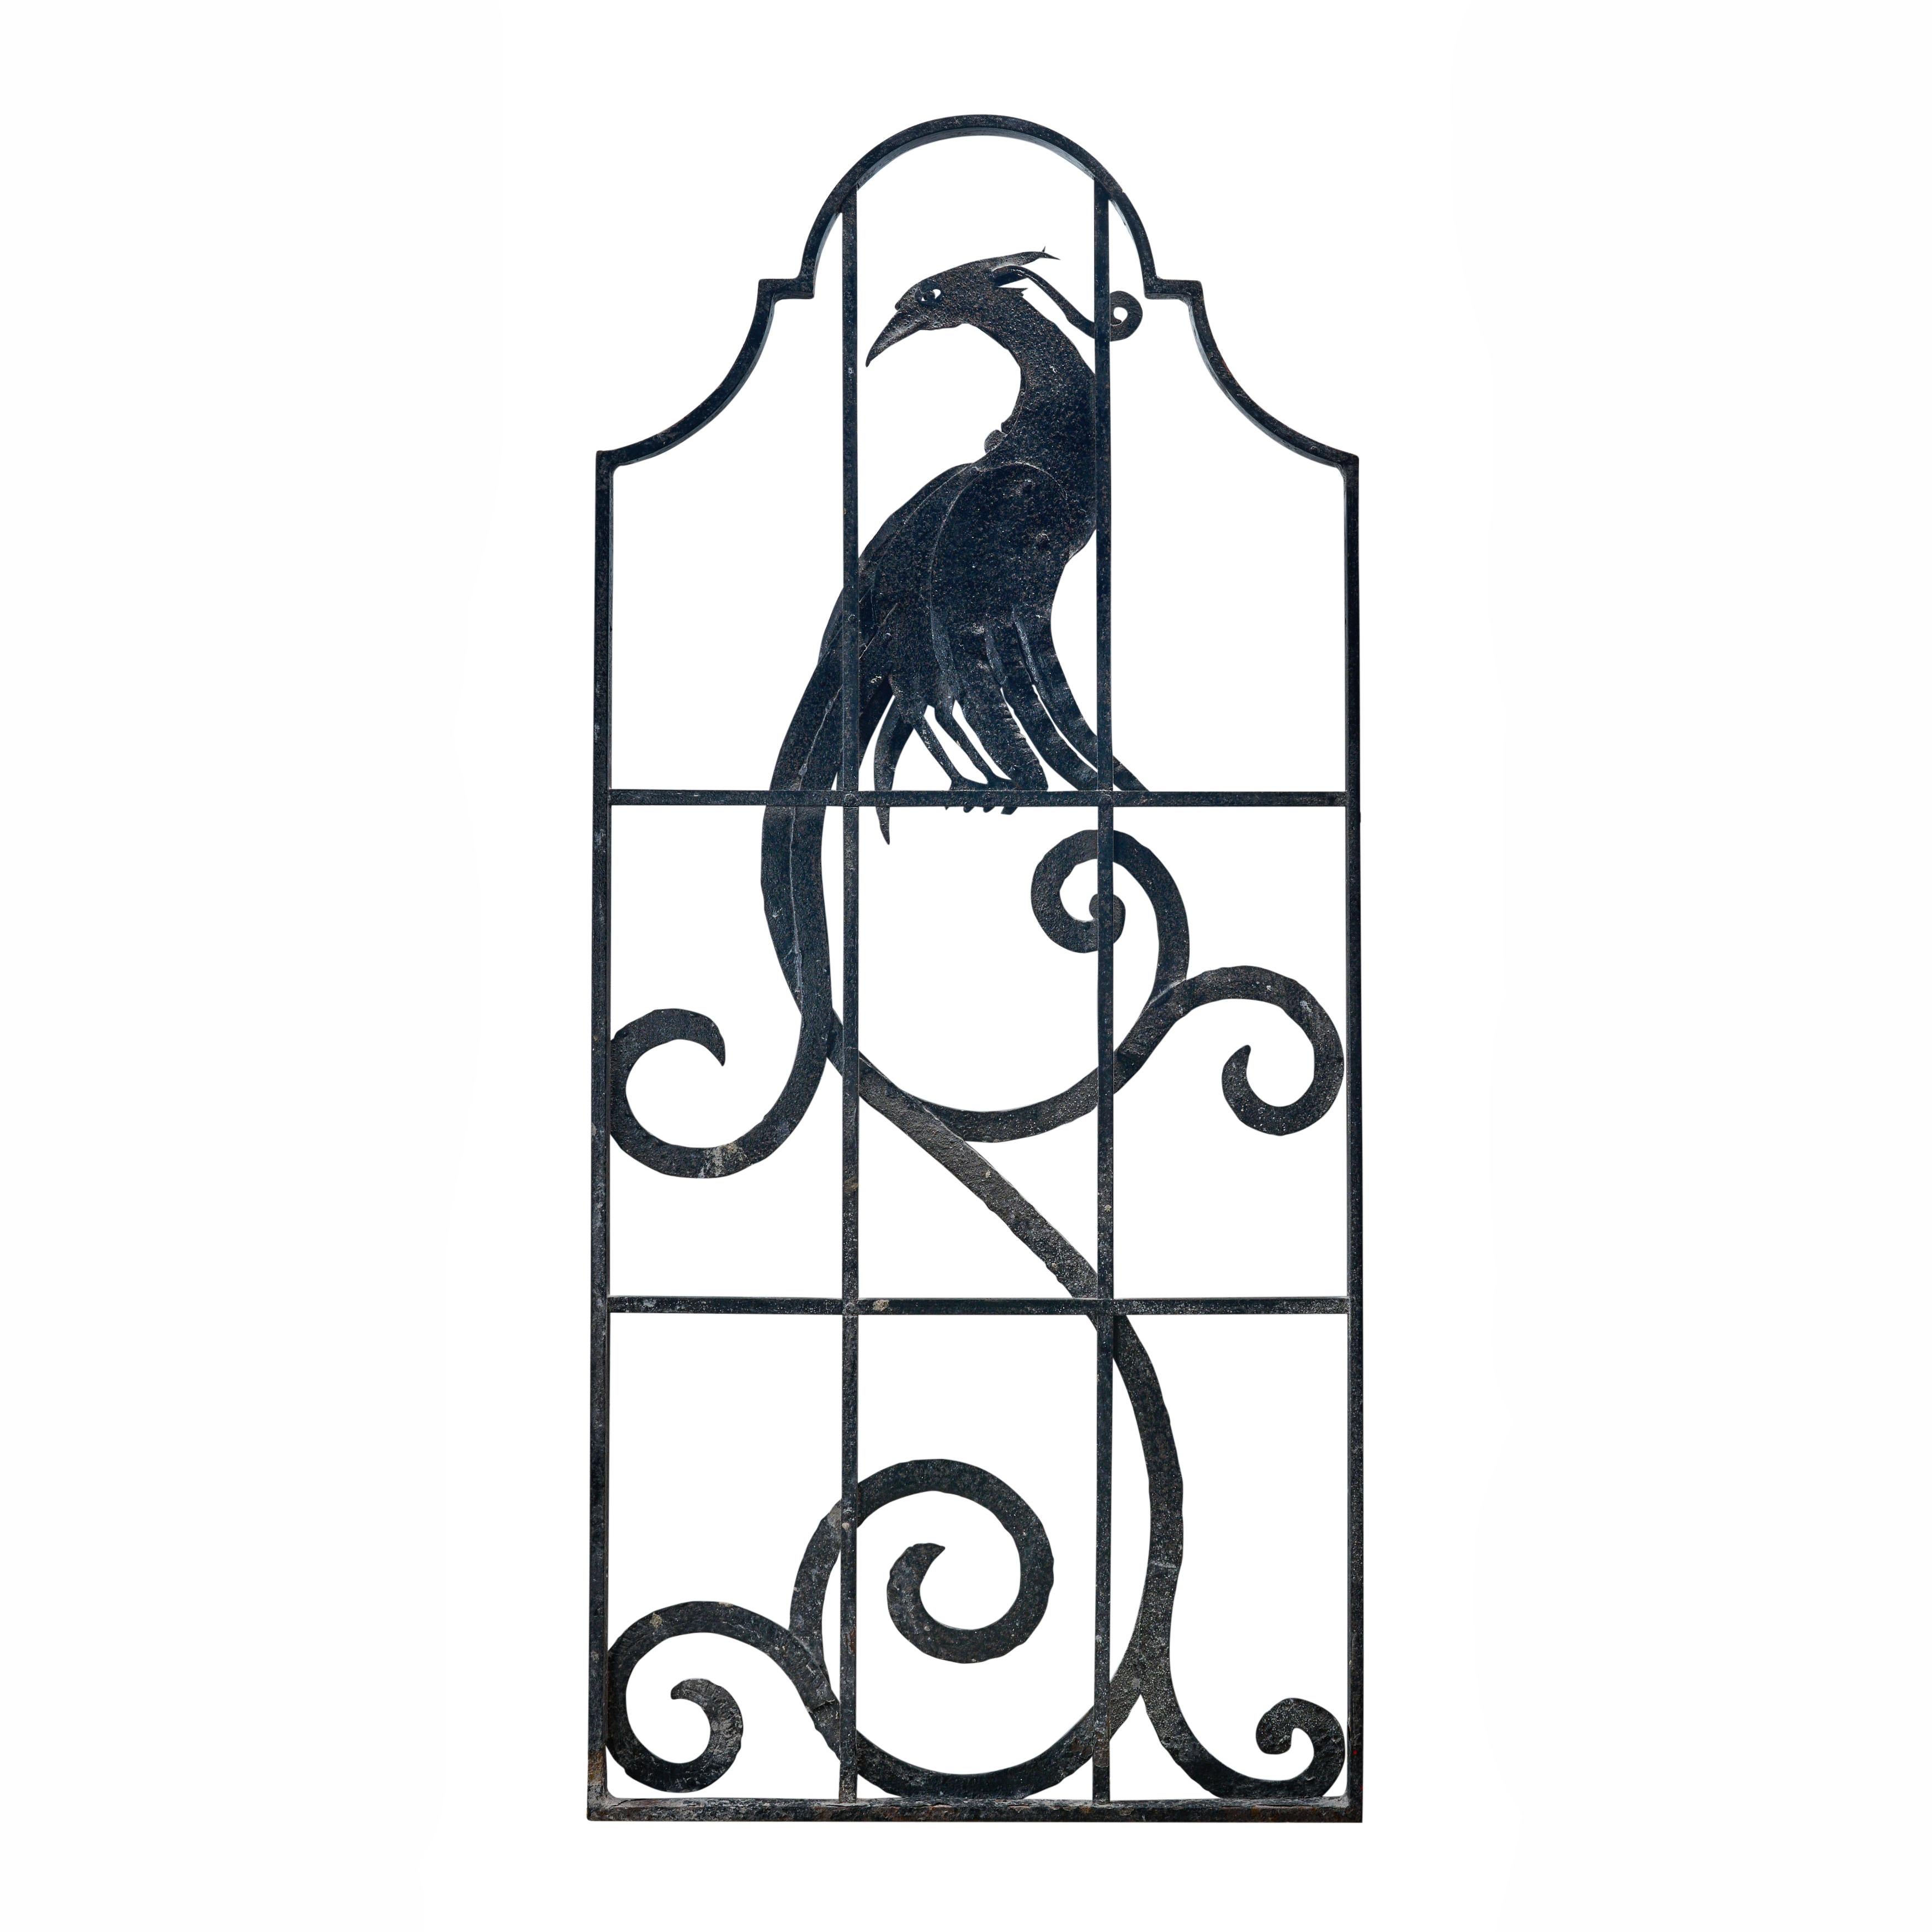 American Wrought Iron Arch Top Decorative Grill With Fantastic Bird Design For Sale